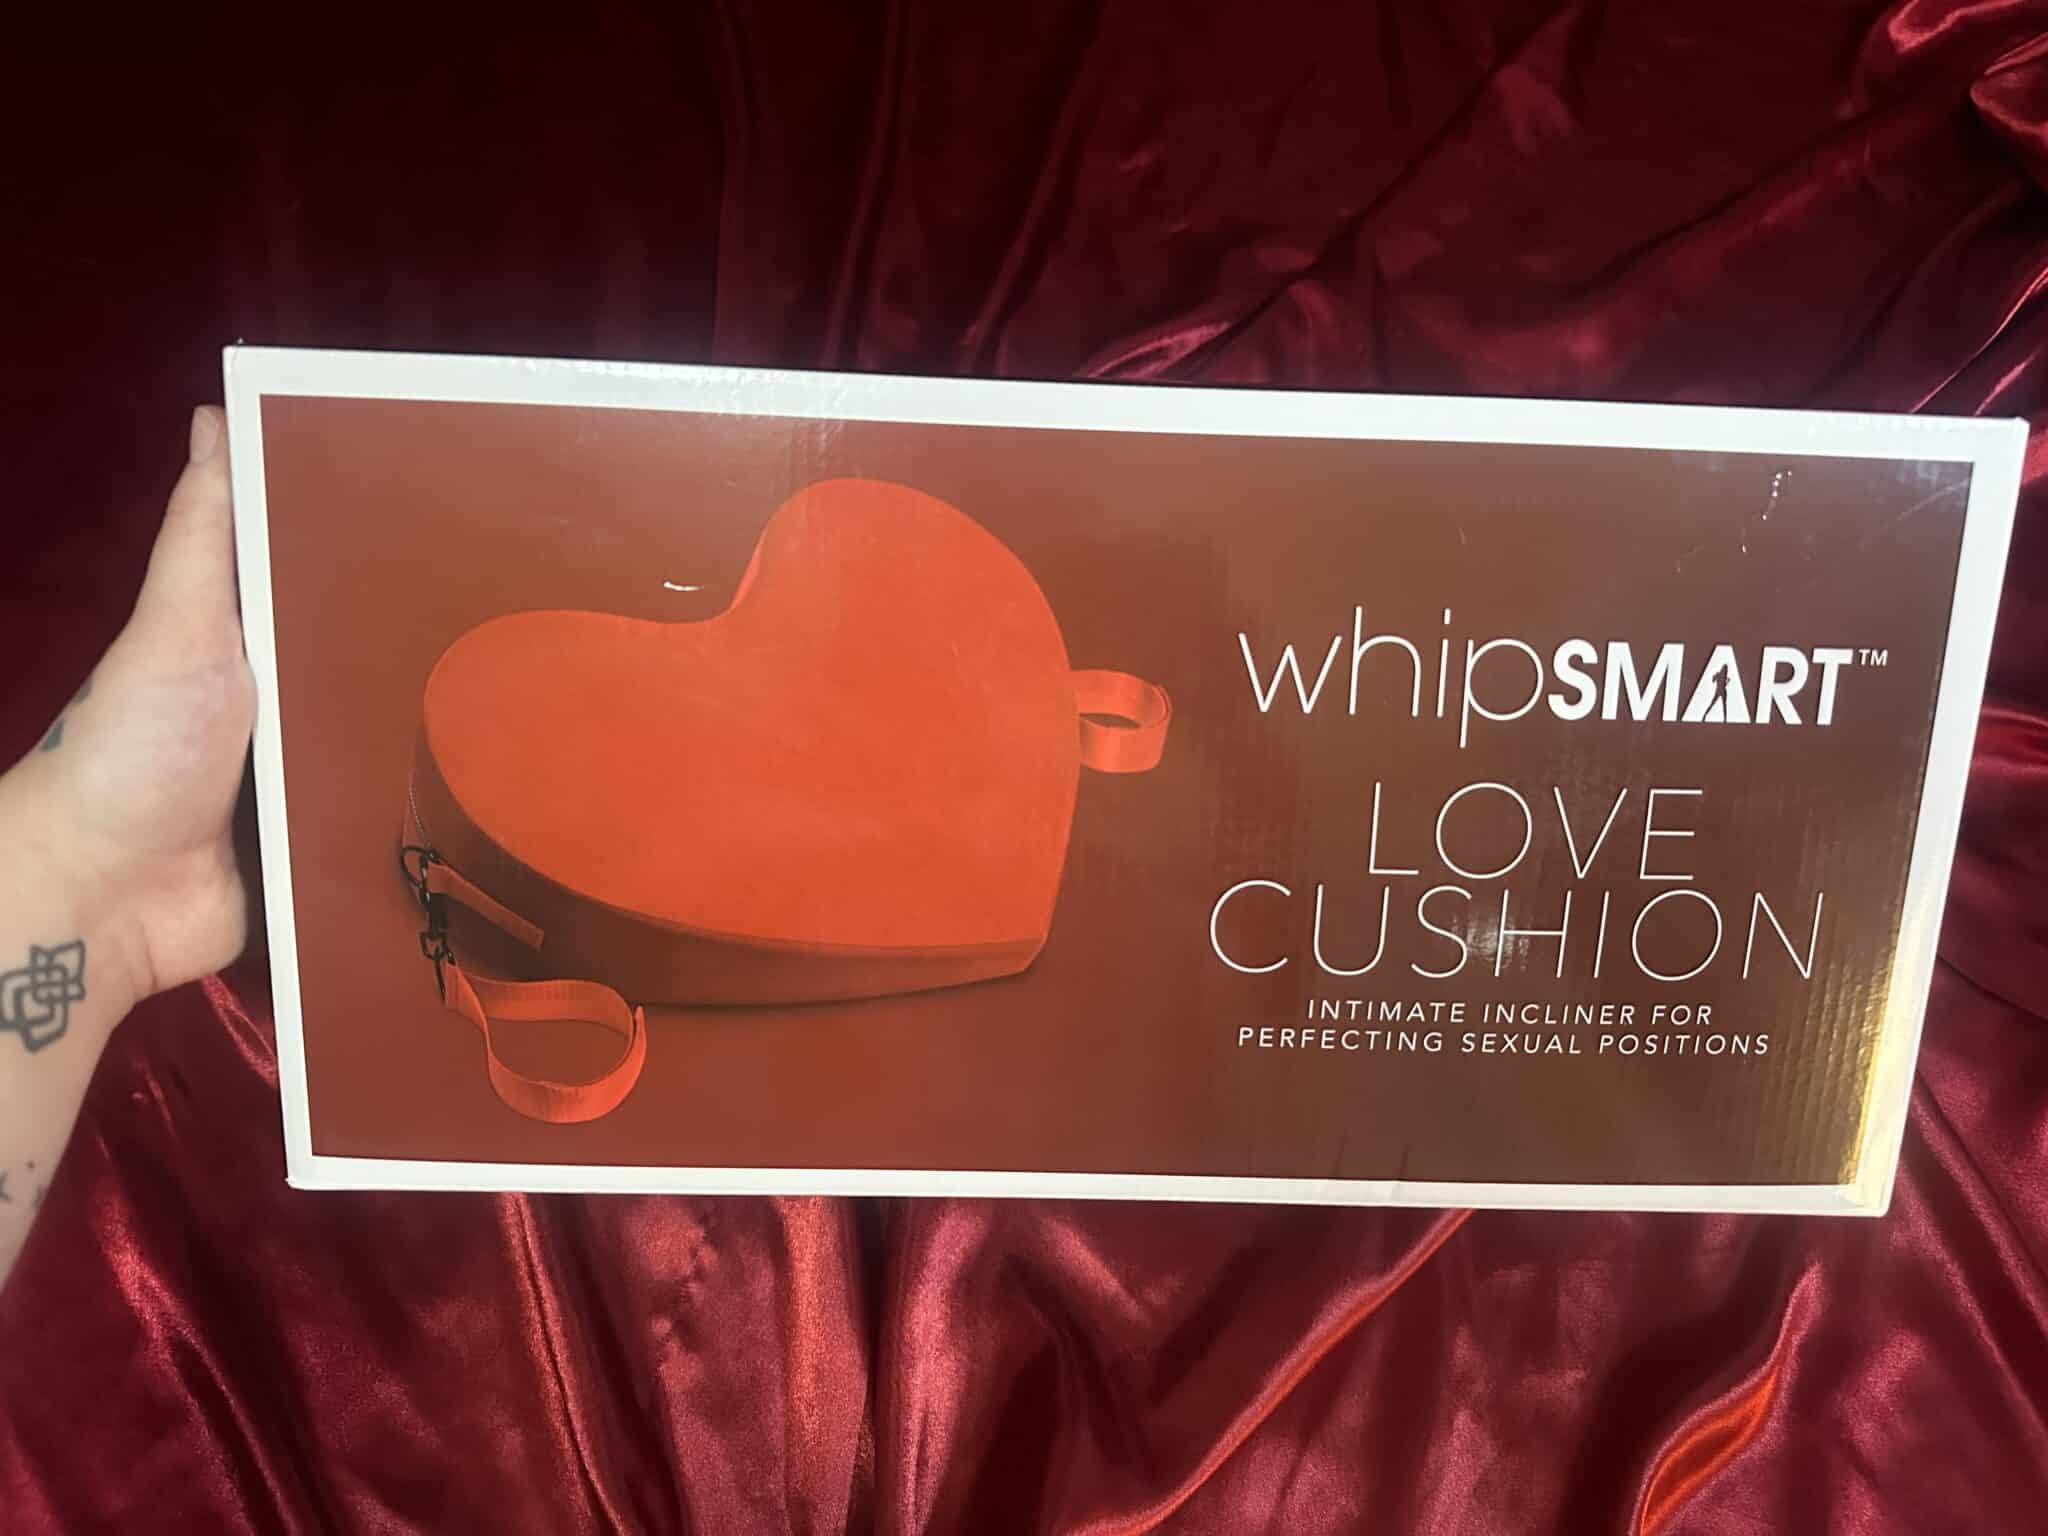 Whipsmart Love Cushion with Restraints The Whipsmart Love Cushion with Restraints’s Packaging: Hit or Miss?